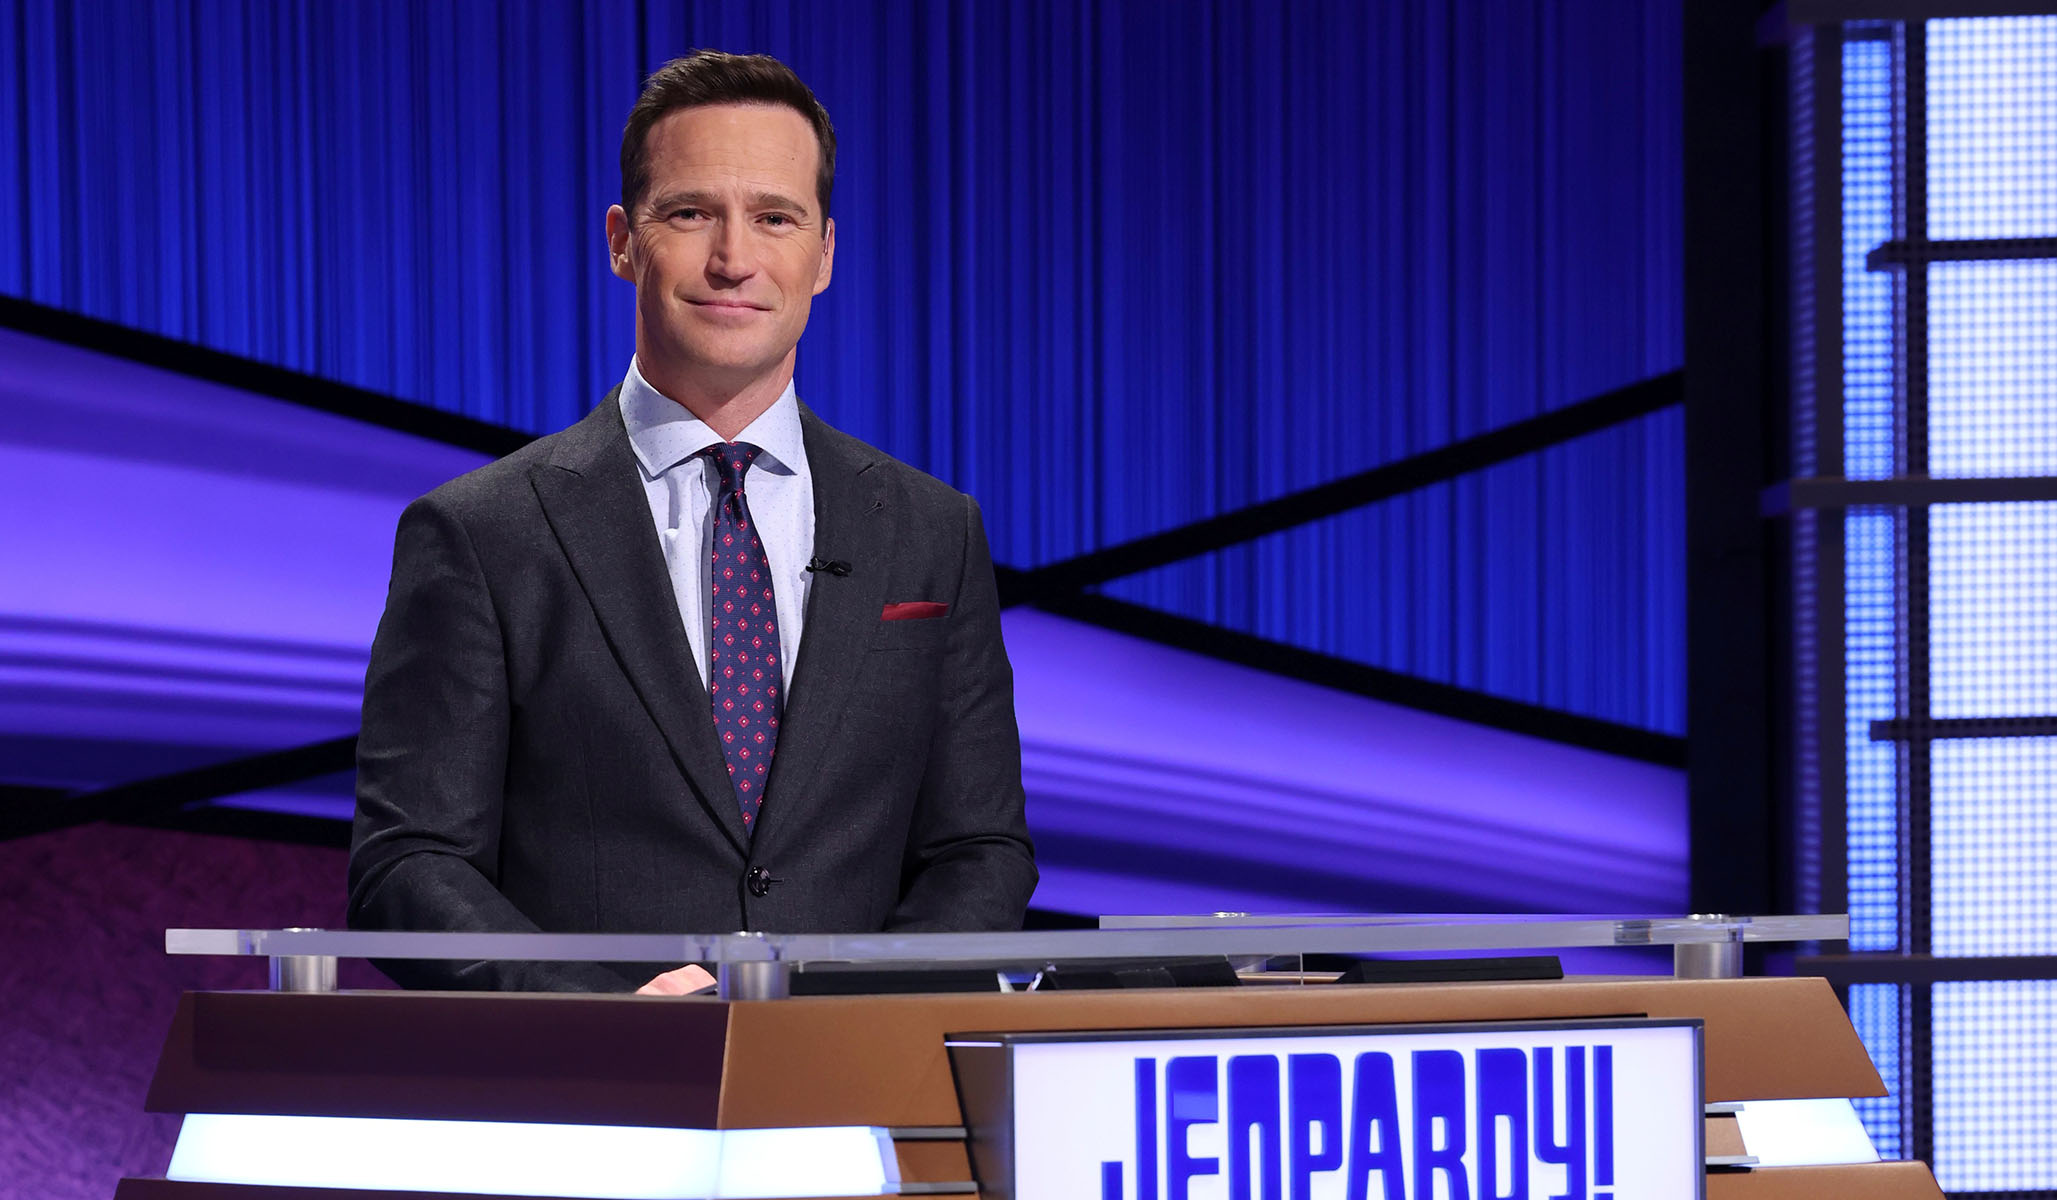 Mike Richards Resigns as Host of Jeopardy after Derogatory Comments